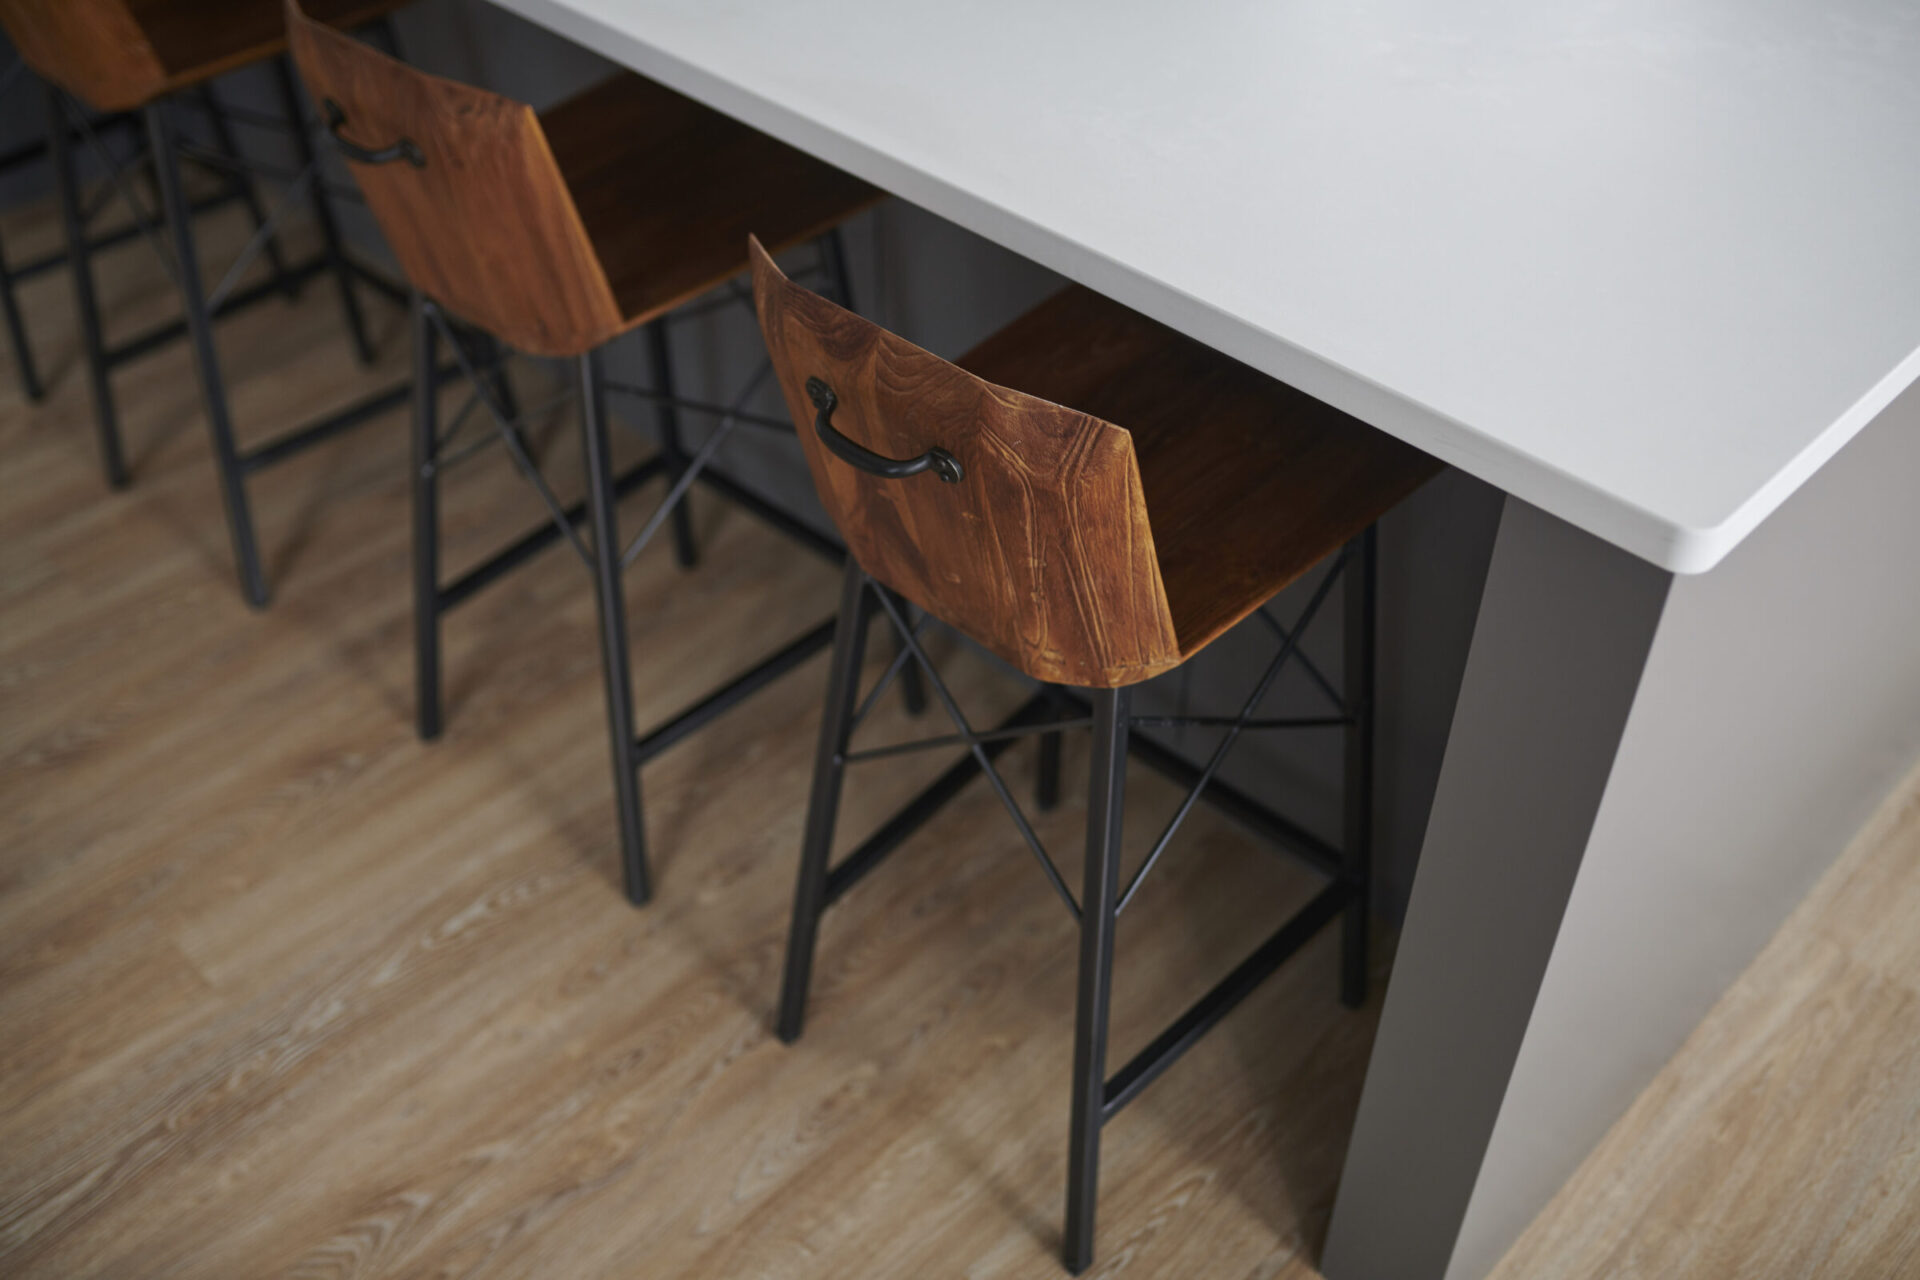 A modern kitchen interior with a white countertop, wooden bar stools with black metal legs, and light wooden flooring, shot in a minimalist style.